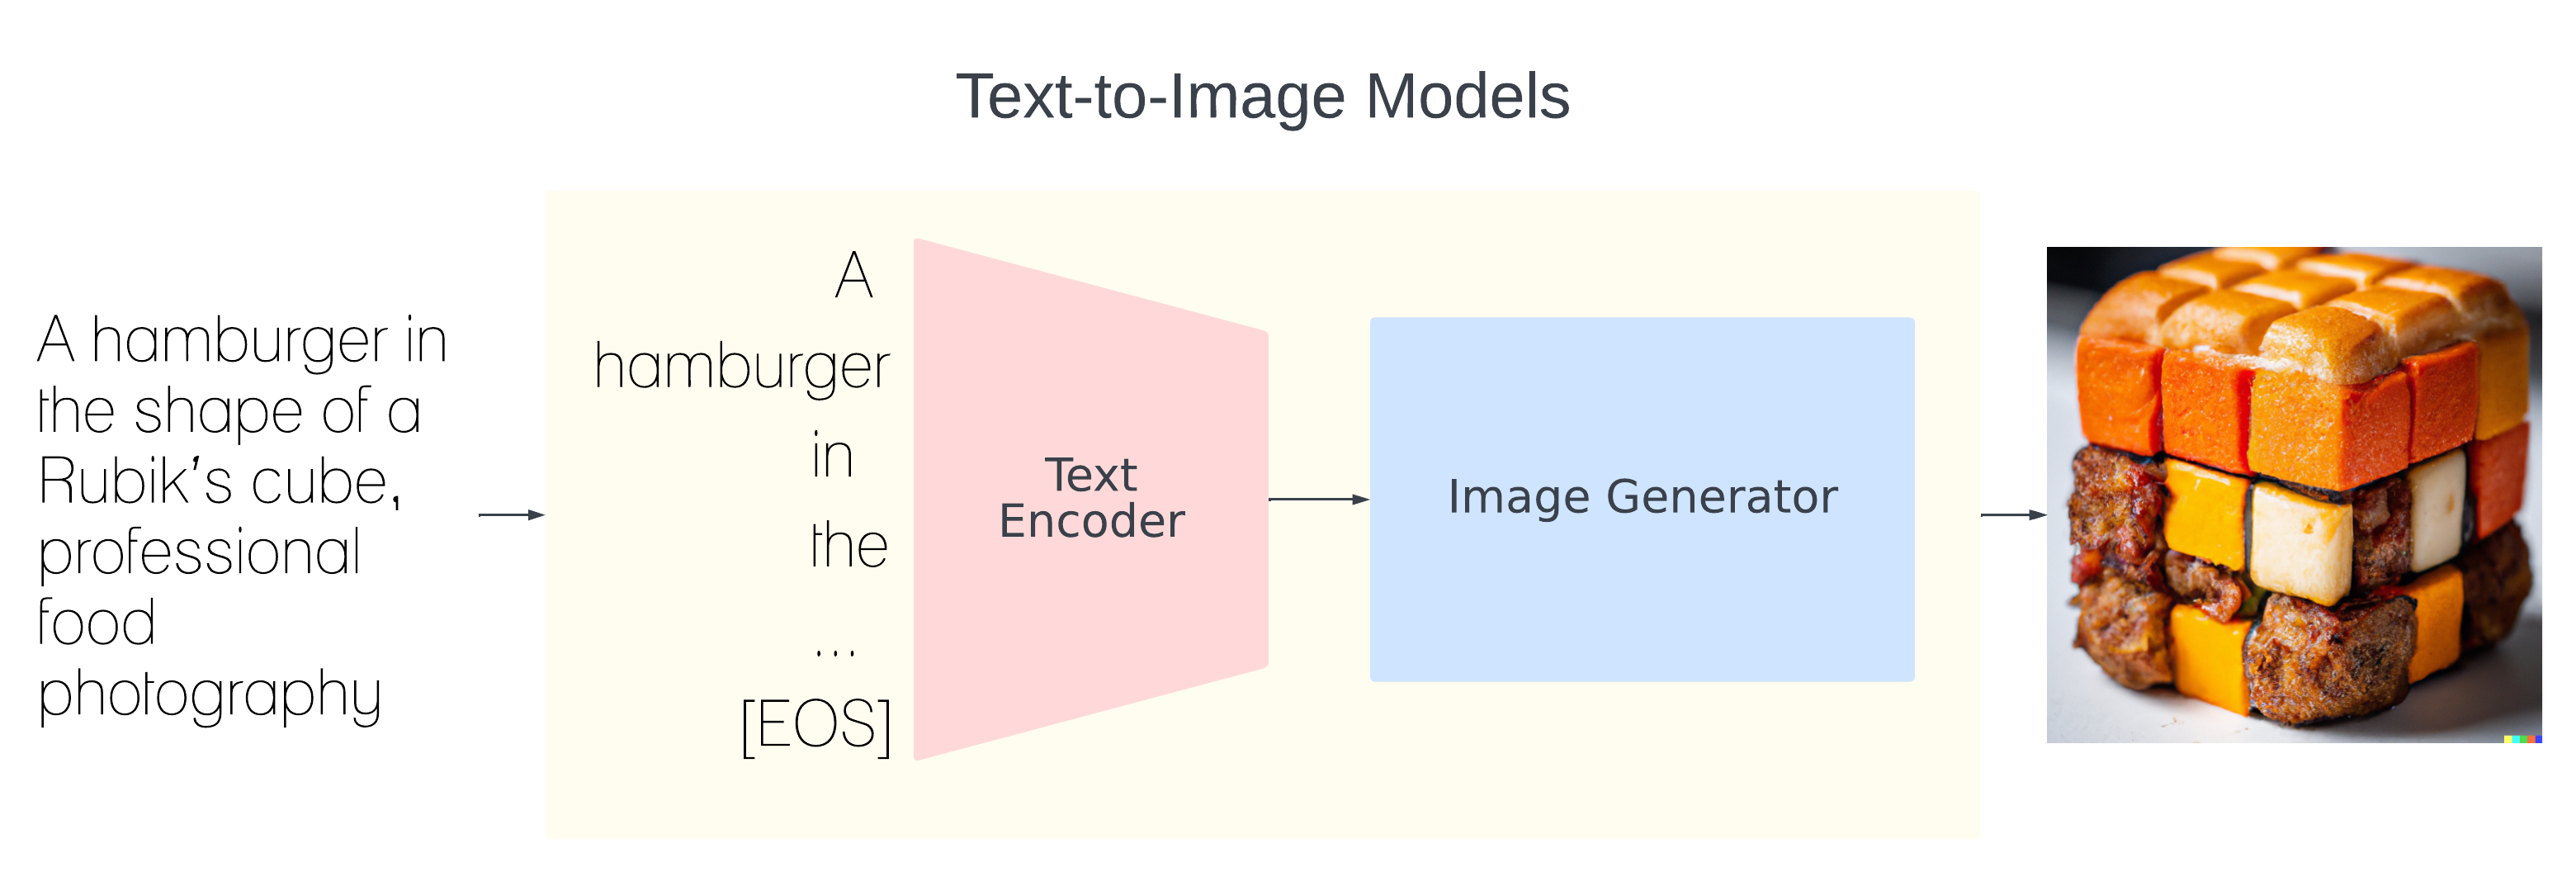 Text-to-Image Models